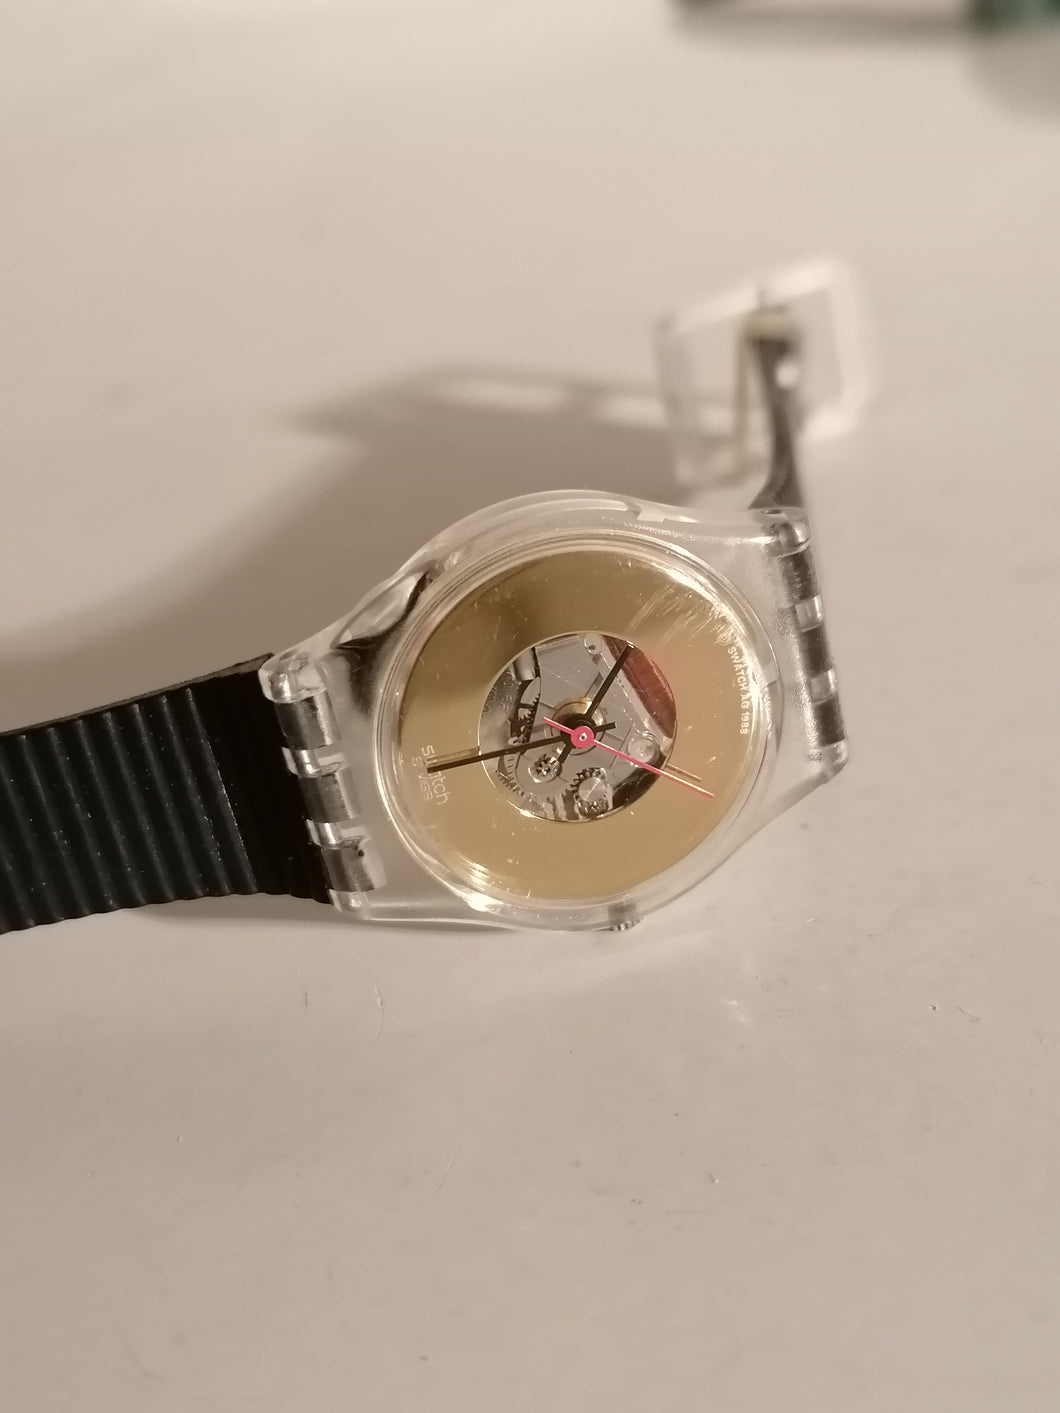 Swatch 1988 fonctionne